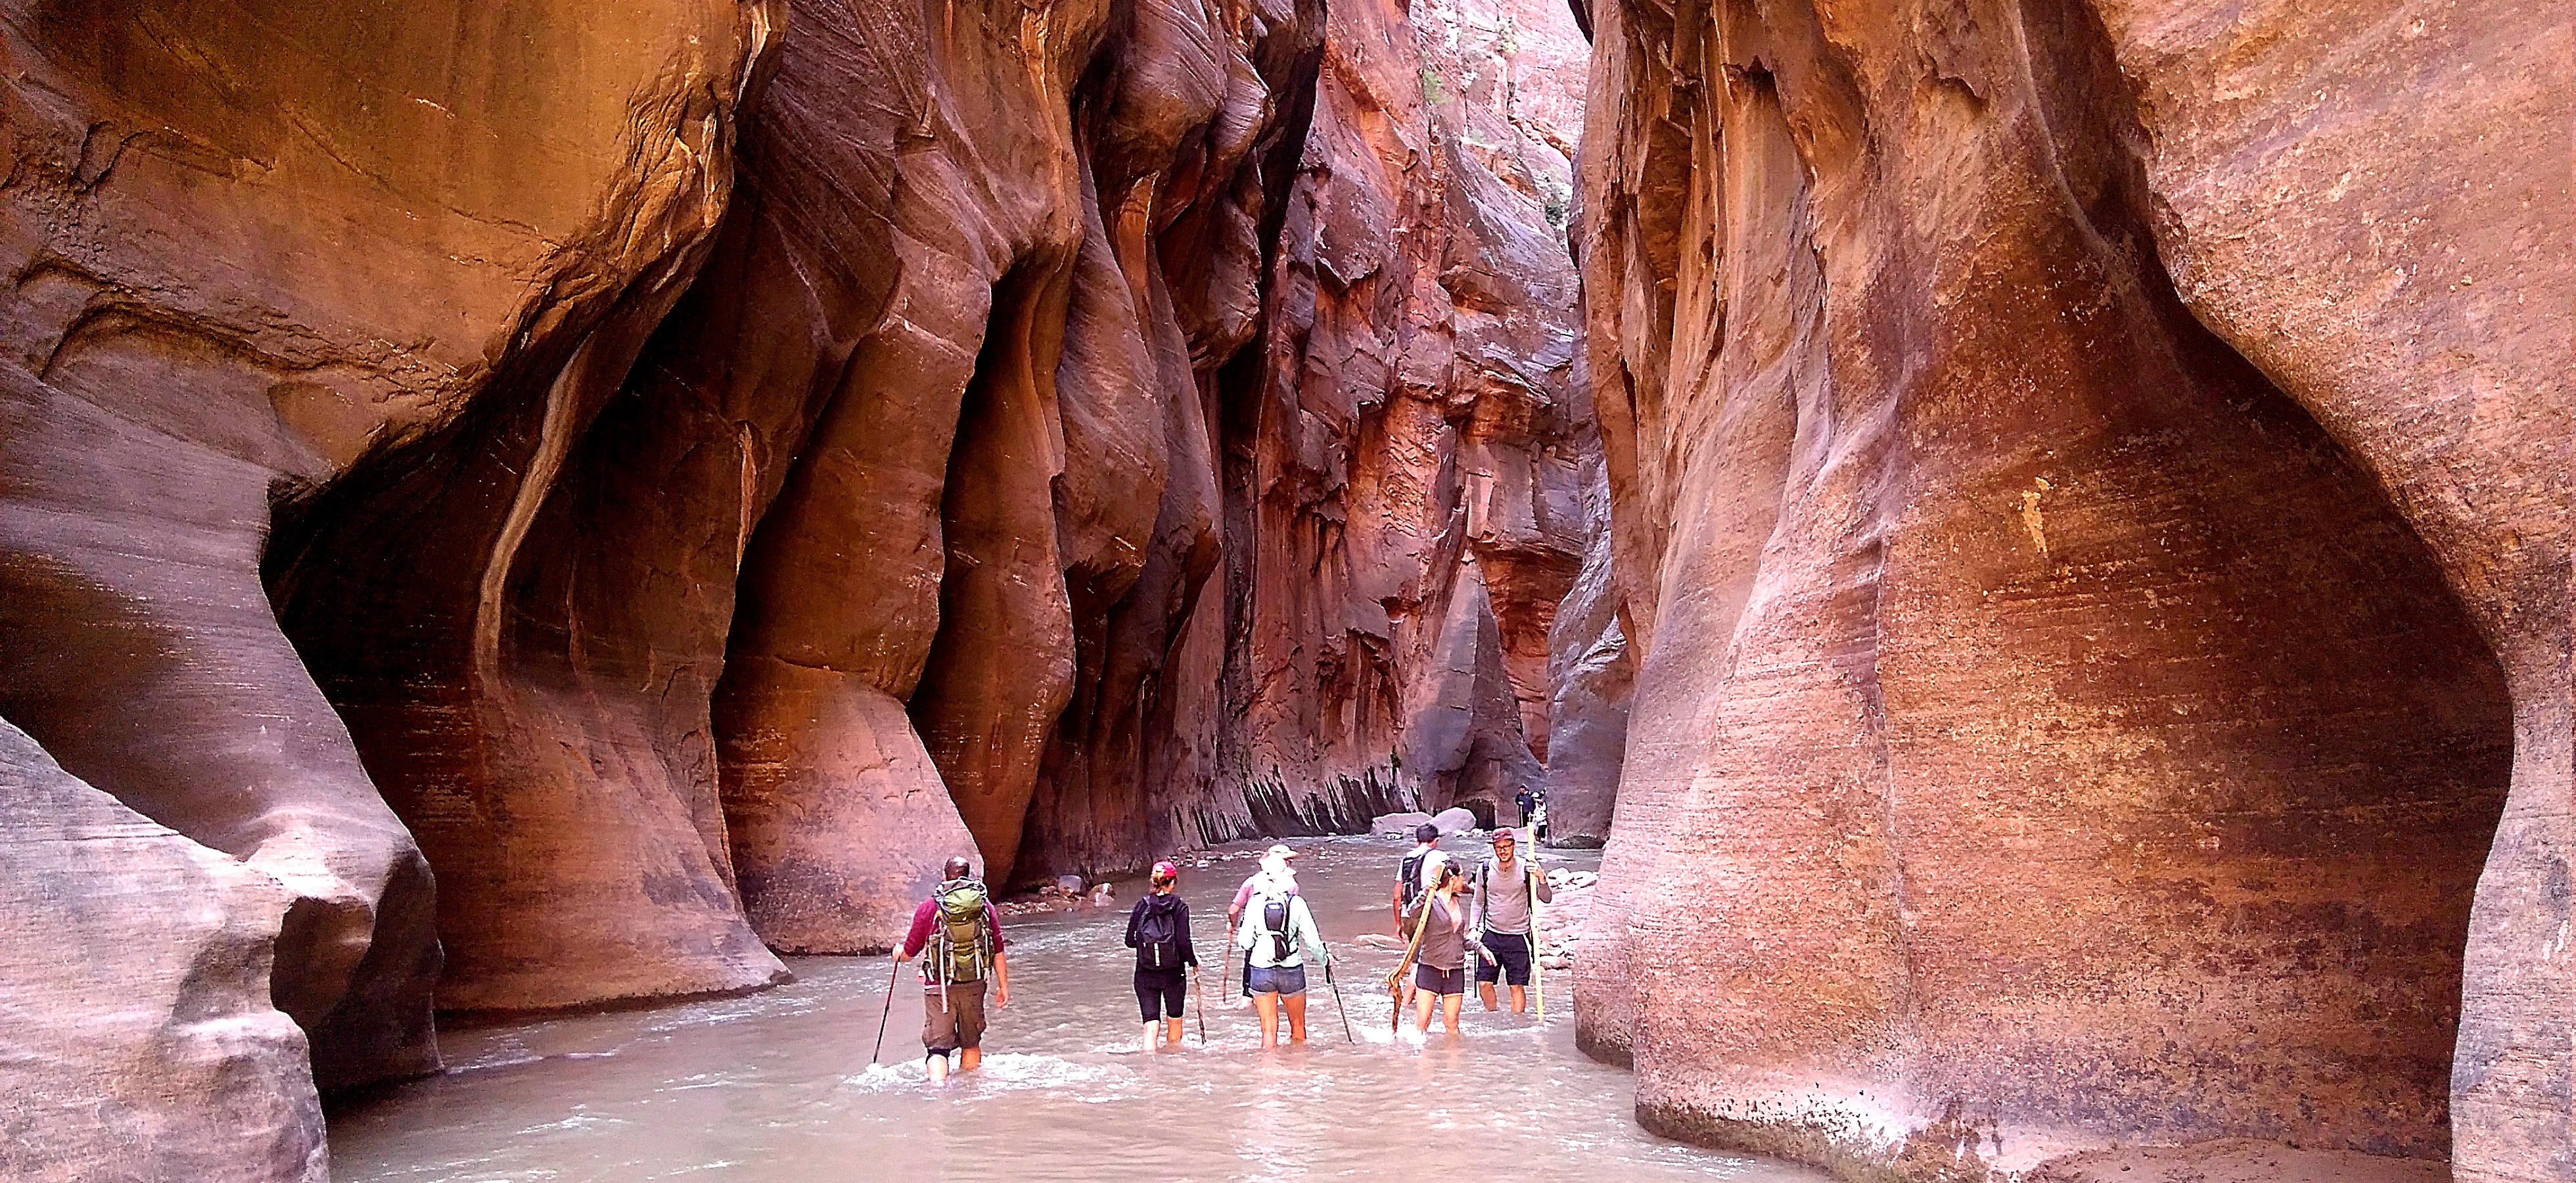 What You Need To Know Before Breathtaking Hike In The Narrows?